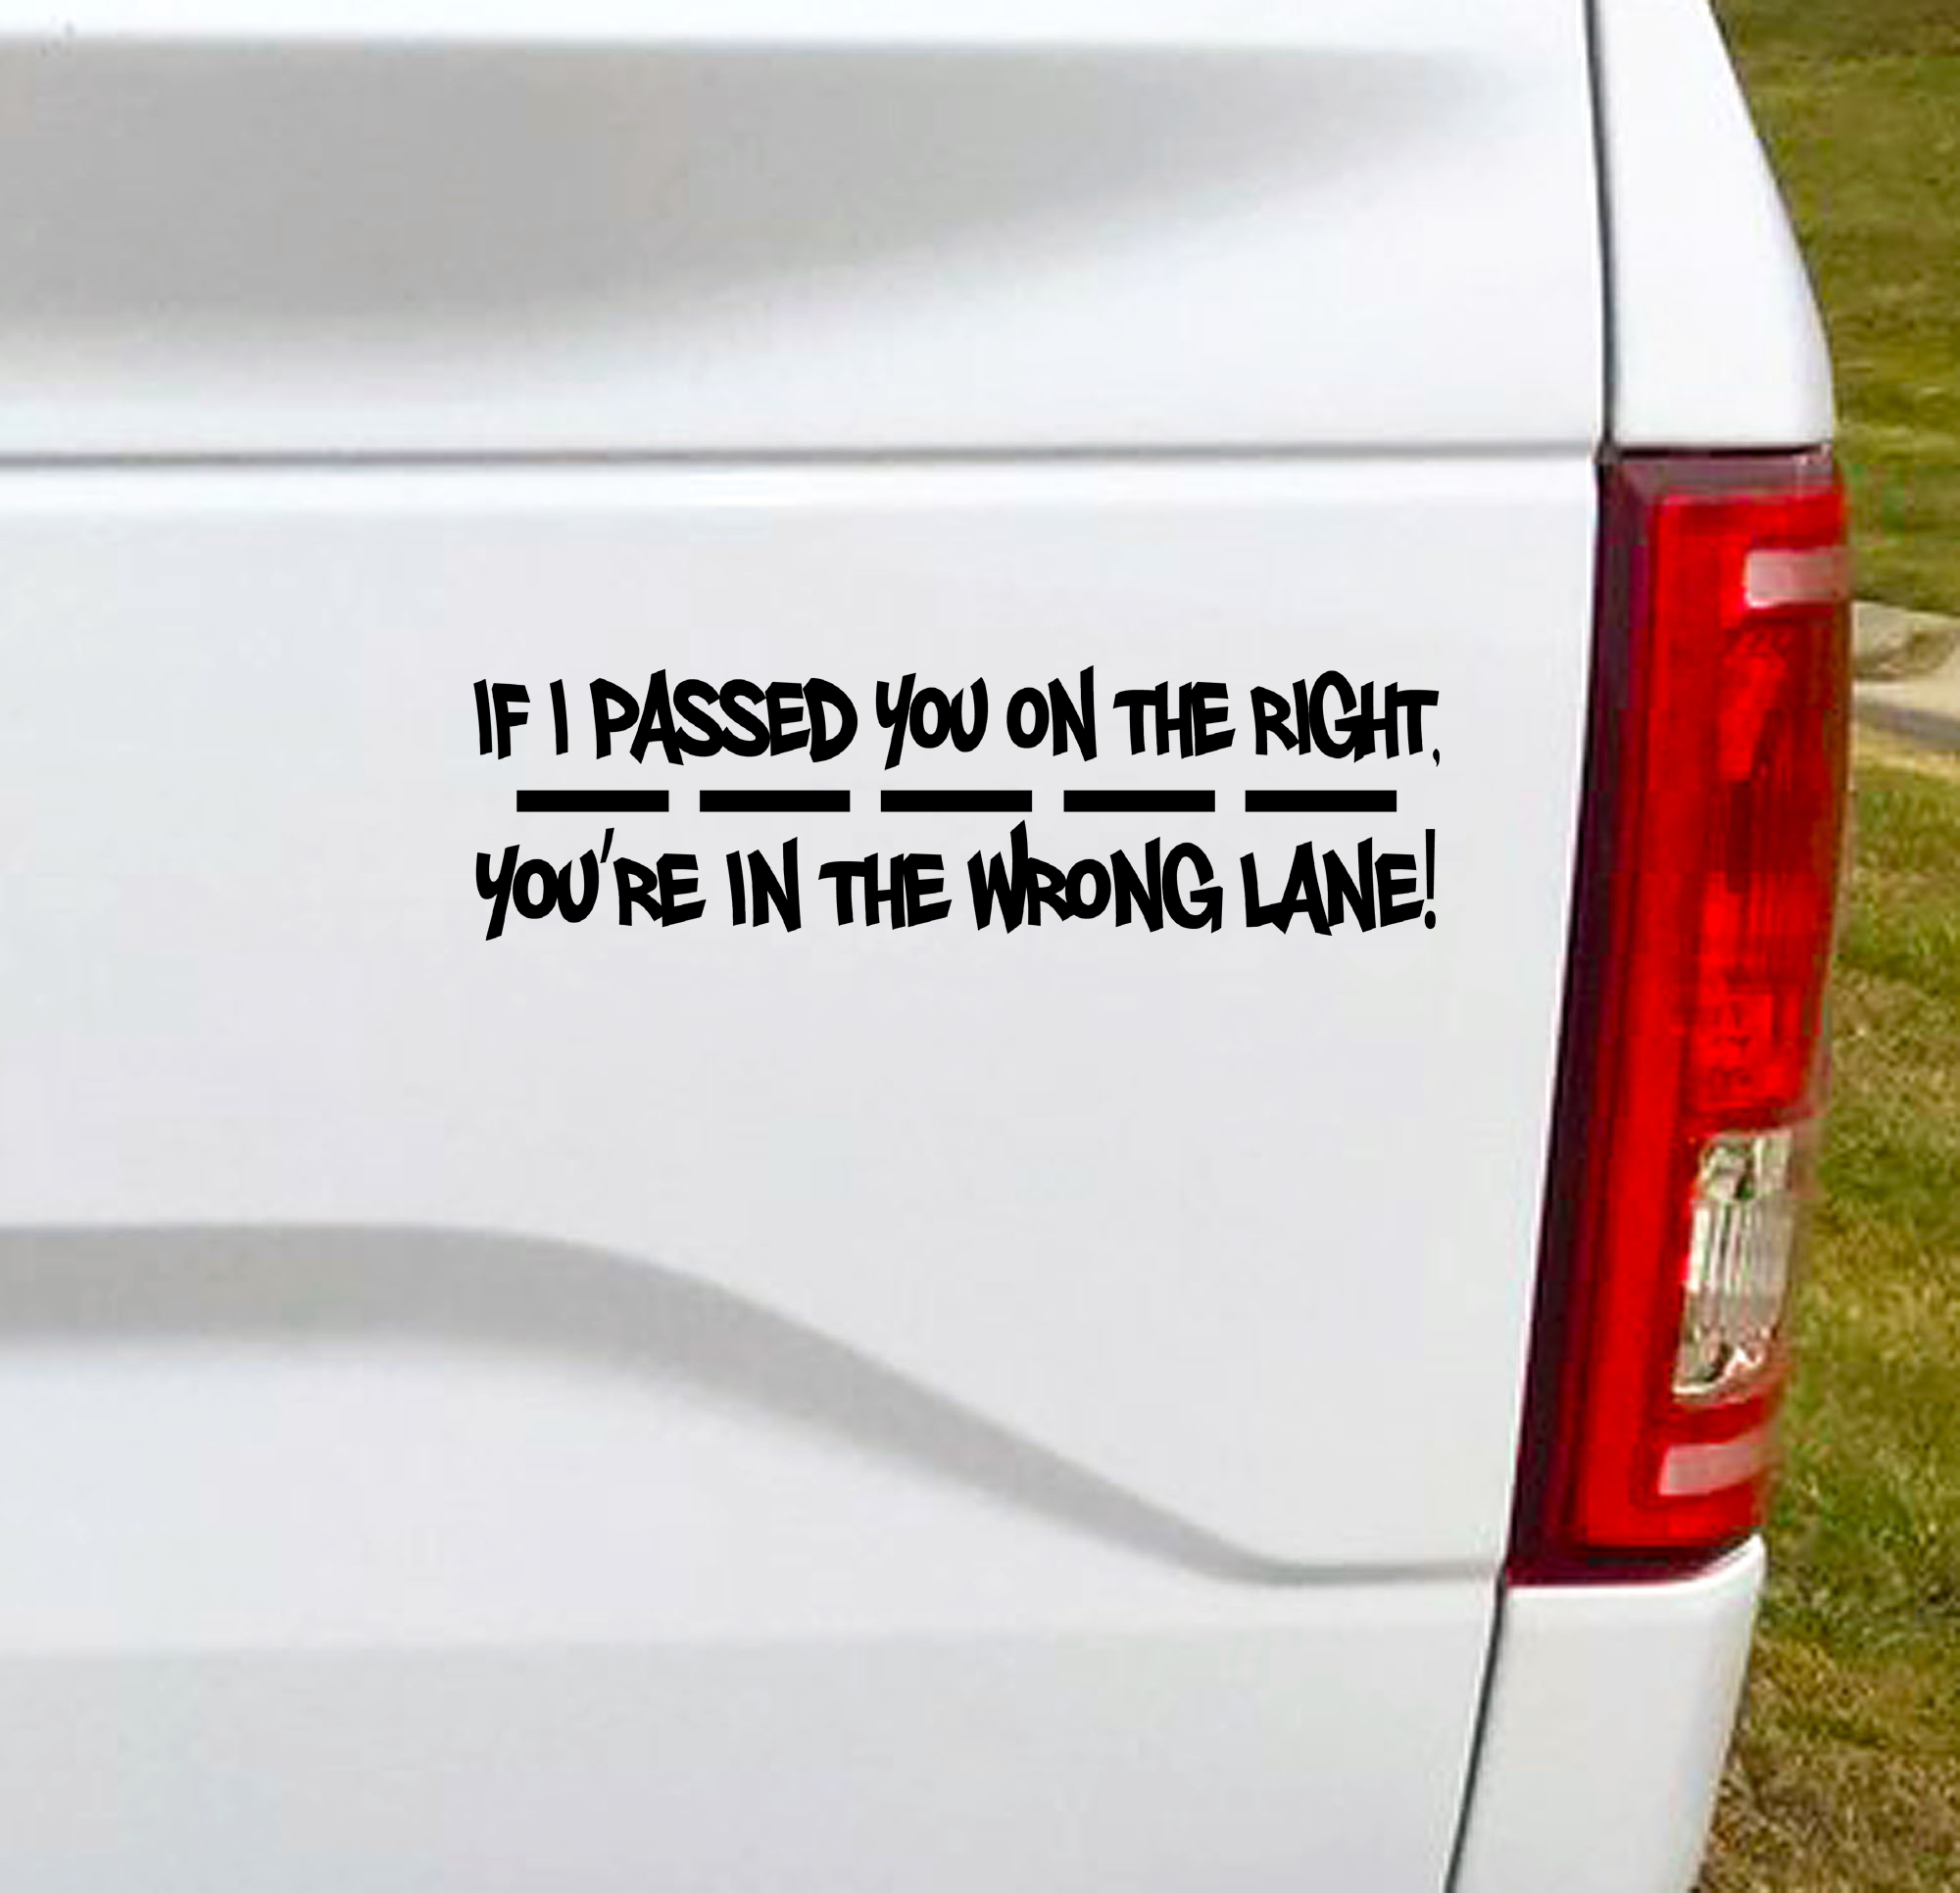 If I passed you on the right, you're in the wrong lane! Car Decal Bumper Sticker.  Some people need to know.  7.5"W x 2.5"H Vinyl Car Decal, Car Sticker, Car Vinyl, Bumper Sticker, Vinyl Stickers, Vinyl Sticker.